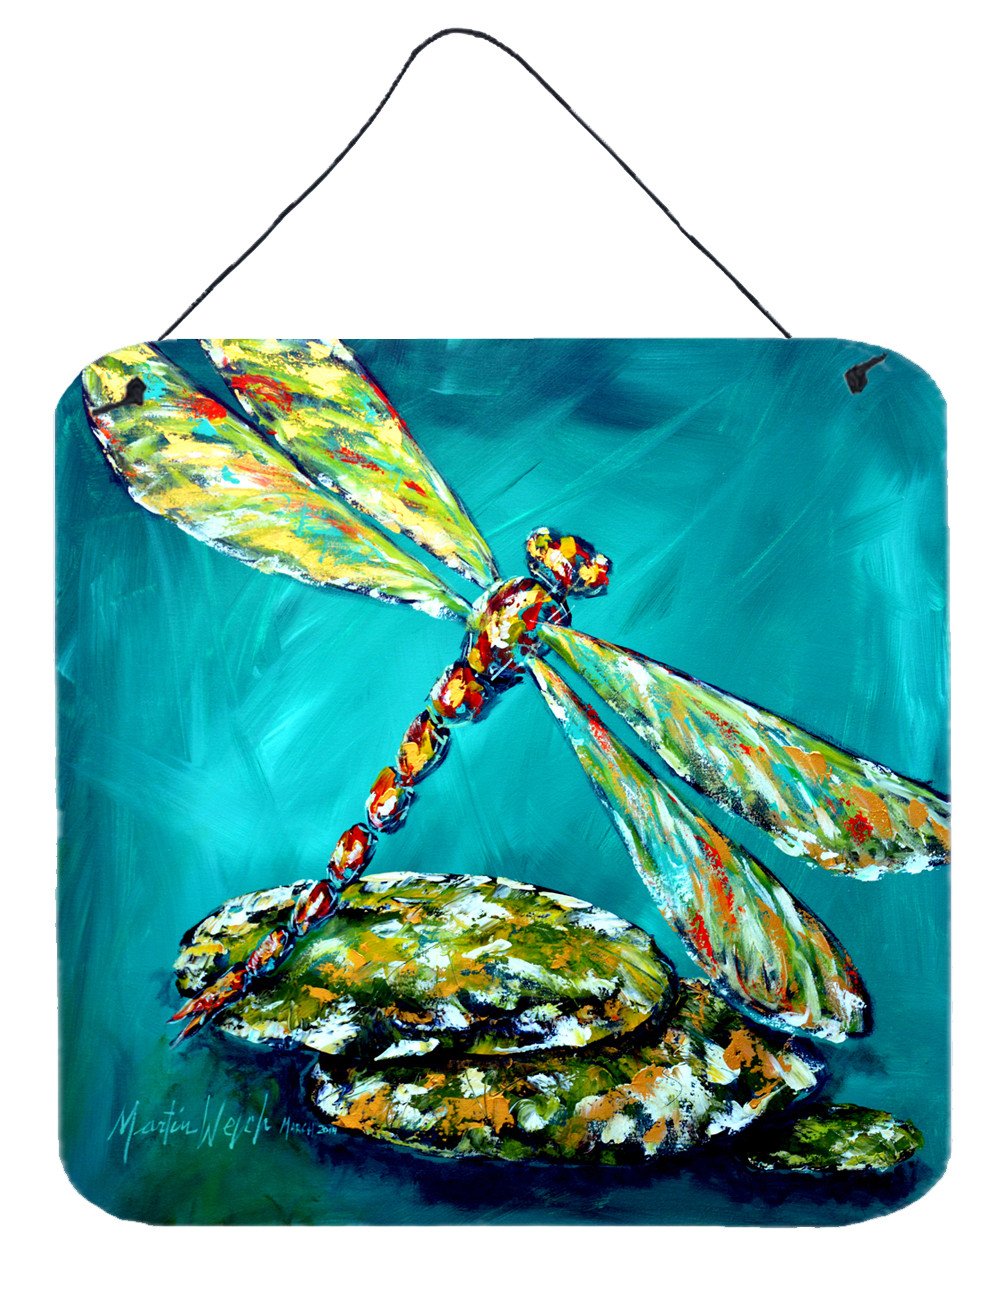 Insect - Dragonfly Matin Wall or Door Hanging Prints MW1144DS66 by Caroline's Treasures